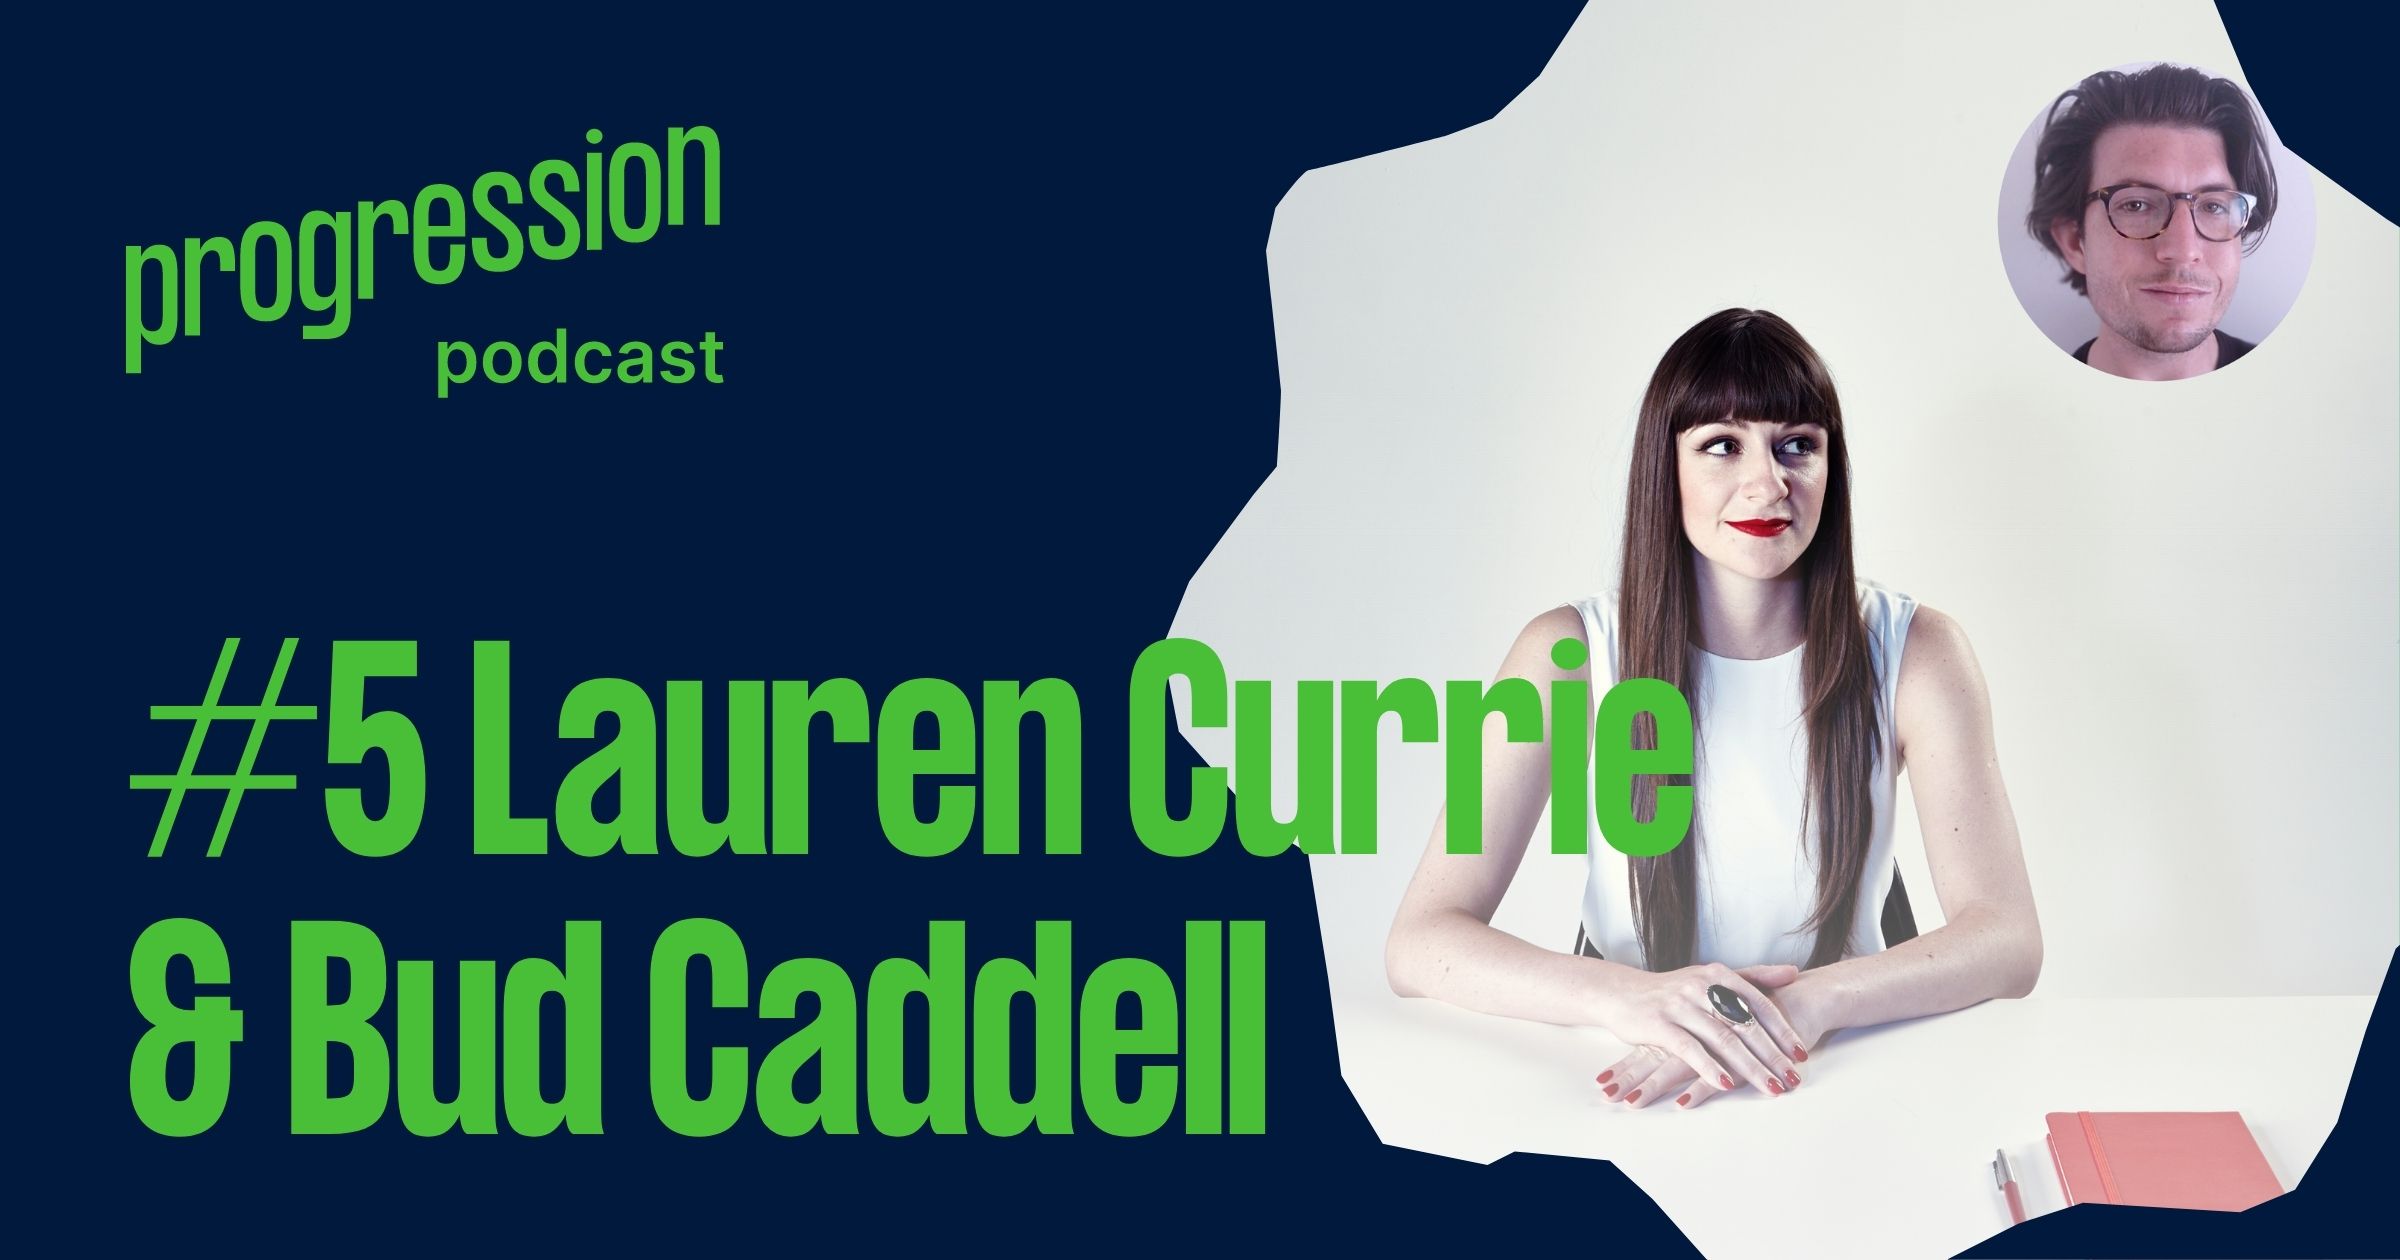 Podcast #5: Lauren Currie and Bud Caddell on making work fair